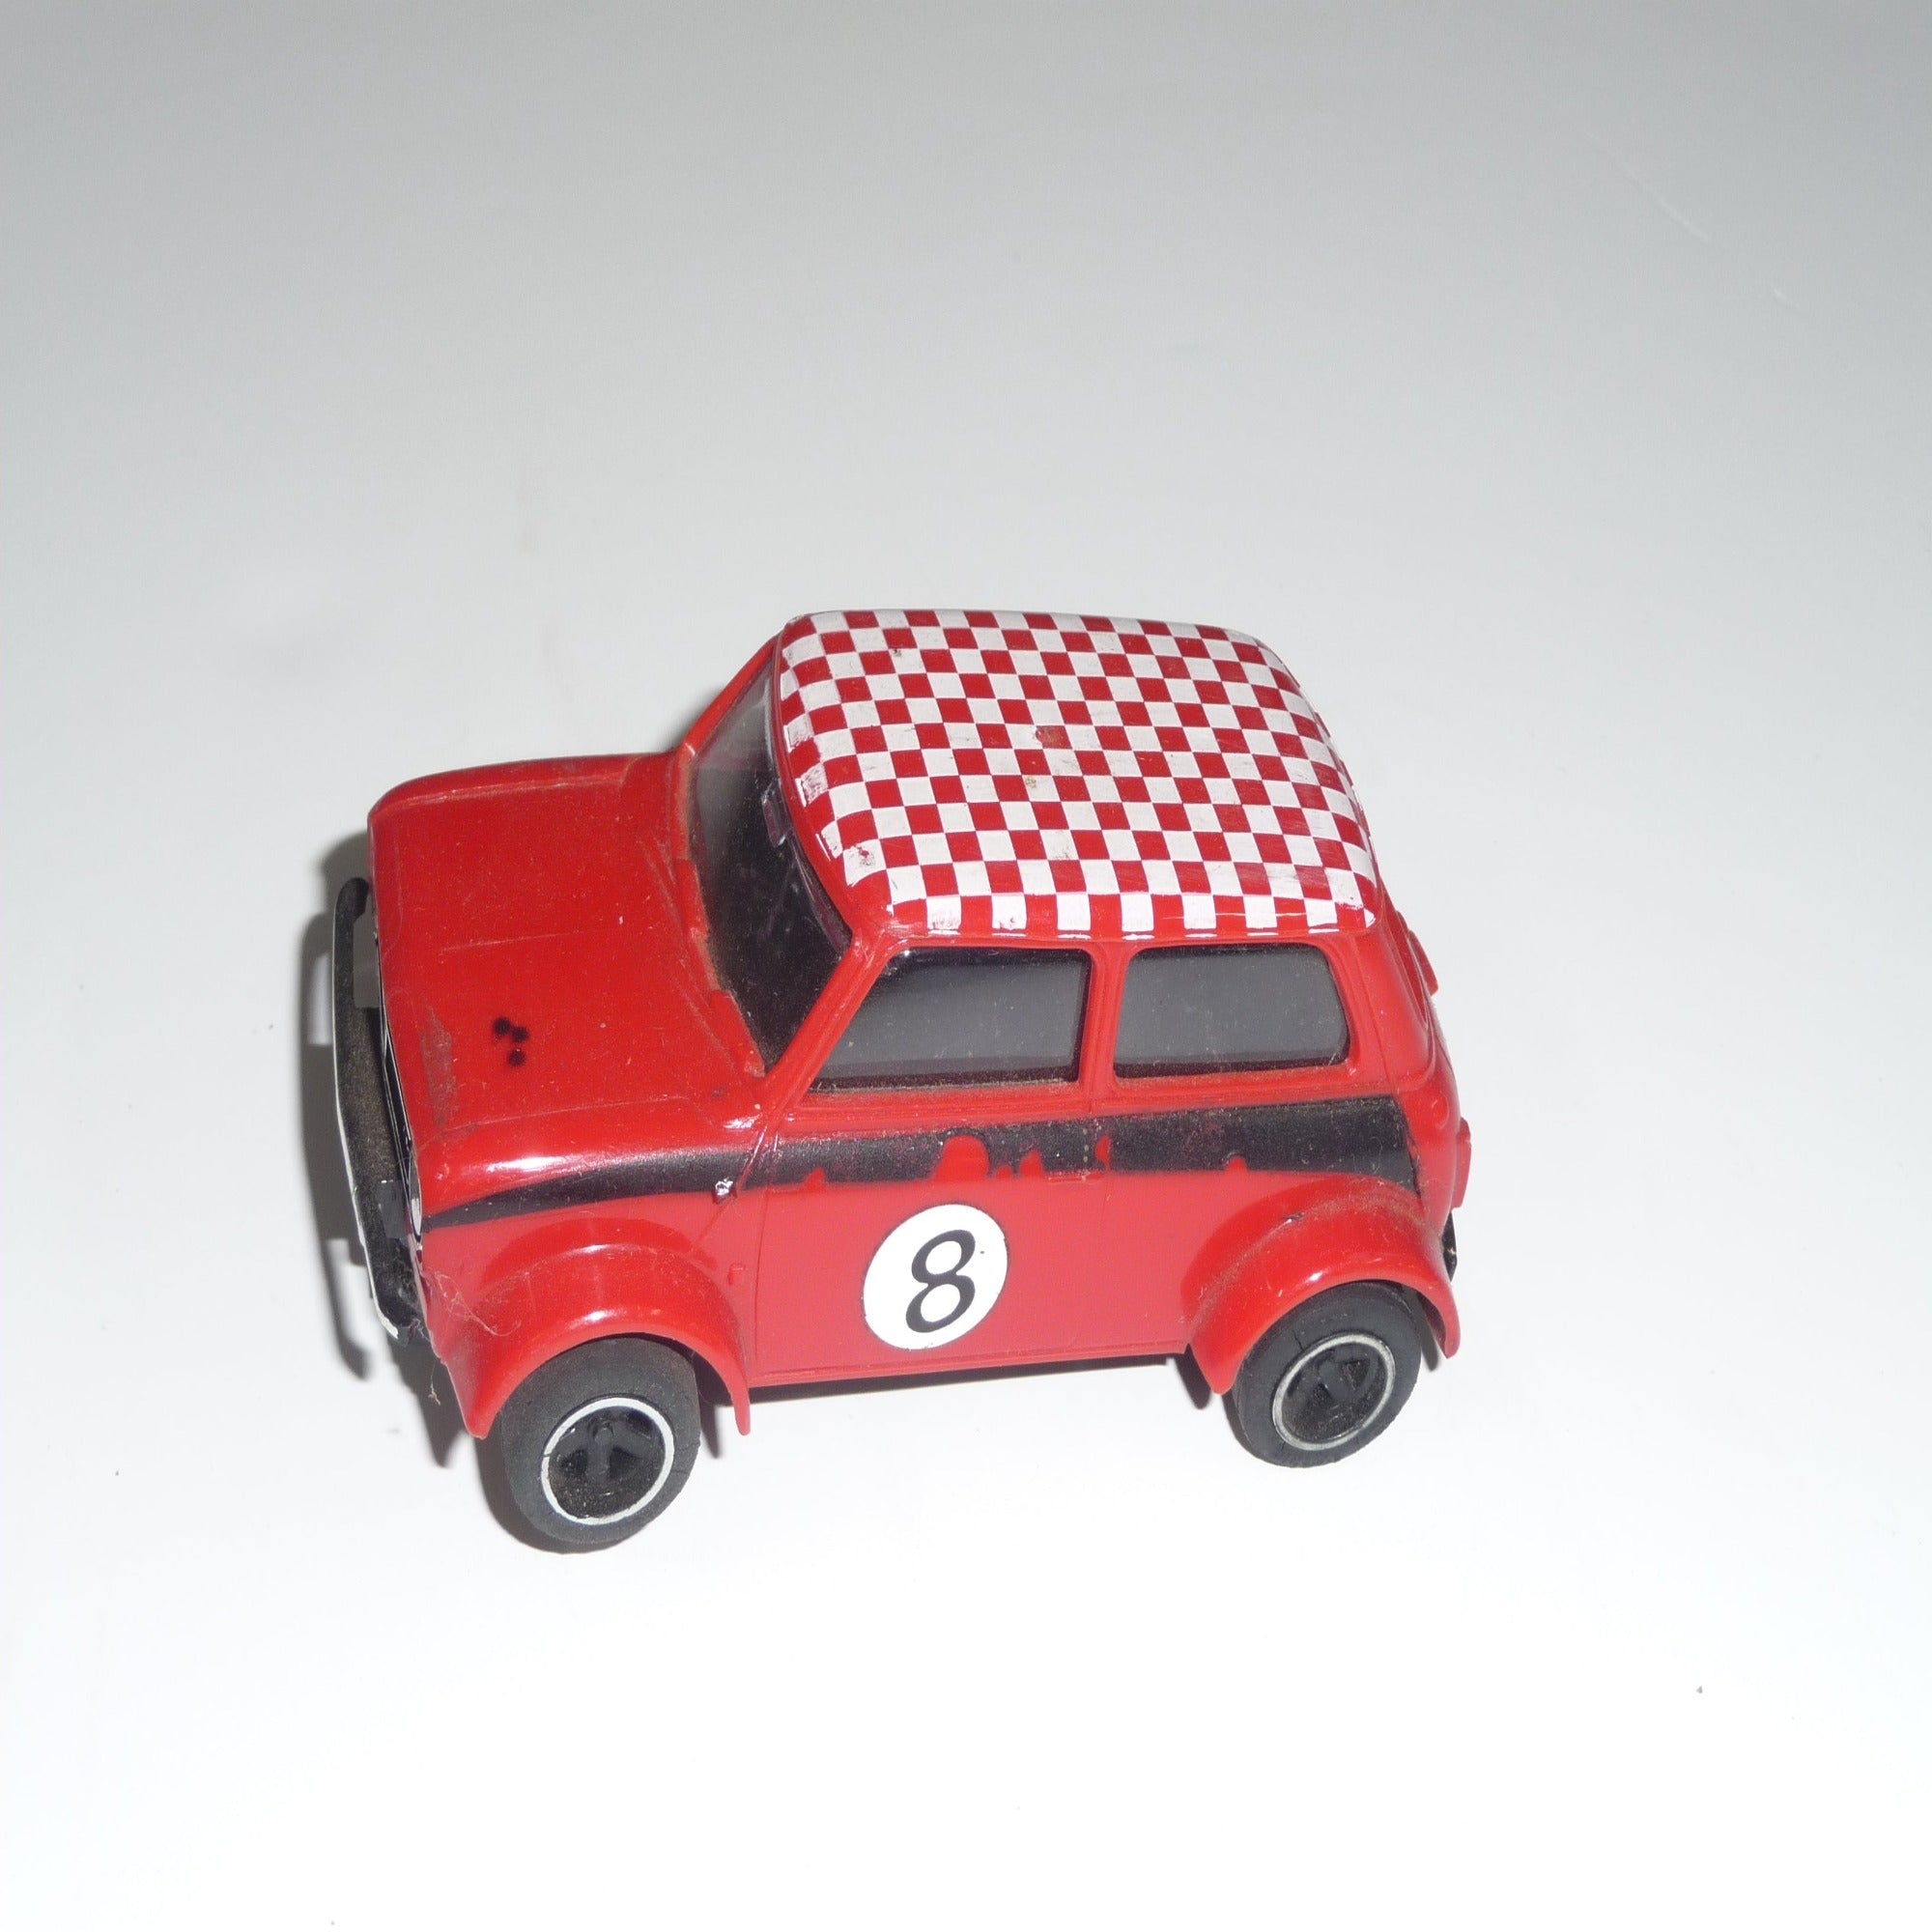 Used Scalextric Mini C122 #8  Free Postage on Orders over $40